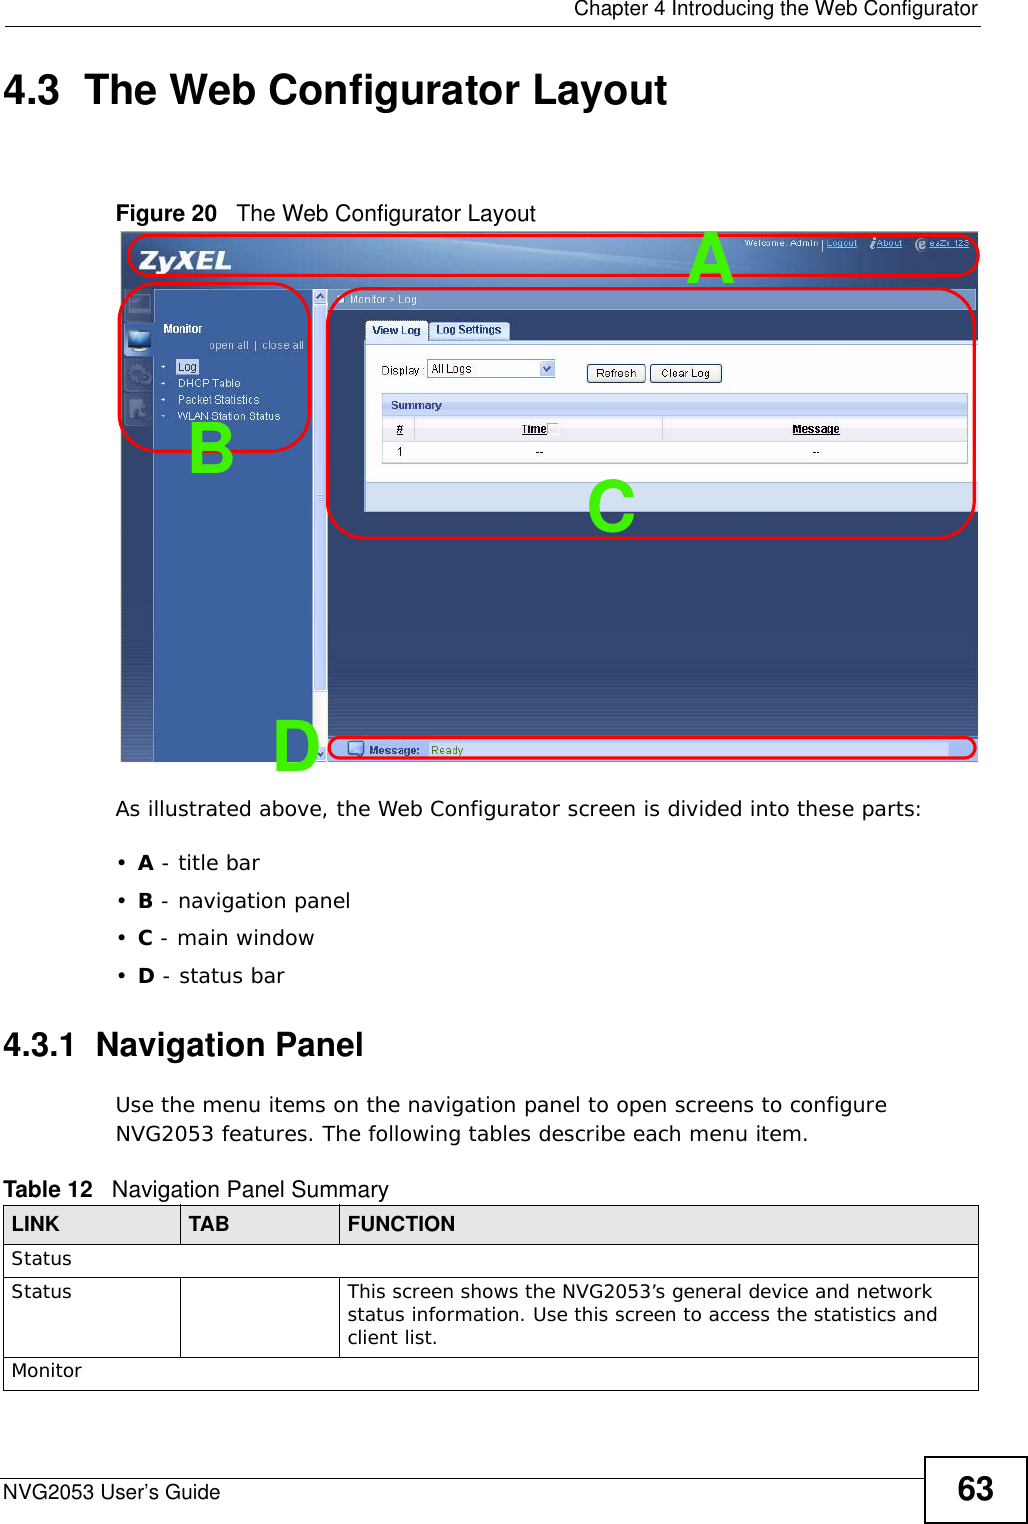  Chapter 4 Introducing the Web ConfiguratorNVG2053 User’s Guide 634.3  The Web Configurator LayoutFigure 20   The Web Configurator LayoutAs illustrated above, the Web Configurator screen is divided into these parts:•A - title bar•B - navigation panel•C - main window•D - status bar4.3.1  Navigation PanelUse the menu items on the navigation panel to open screens to configure NVG2053 features. The following tables describe each menu item.ABCDTable 12   Navigation Panel SummaryLINK TAB FUNCTIONStatusStatus This screen shows the NVG2053’s general device and network status information. Use this screen to access the statistics and client list.Monitor